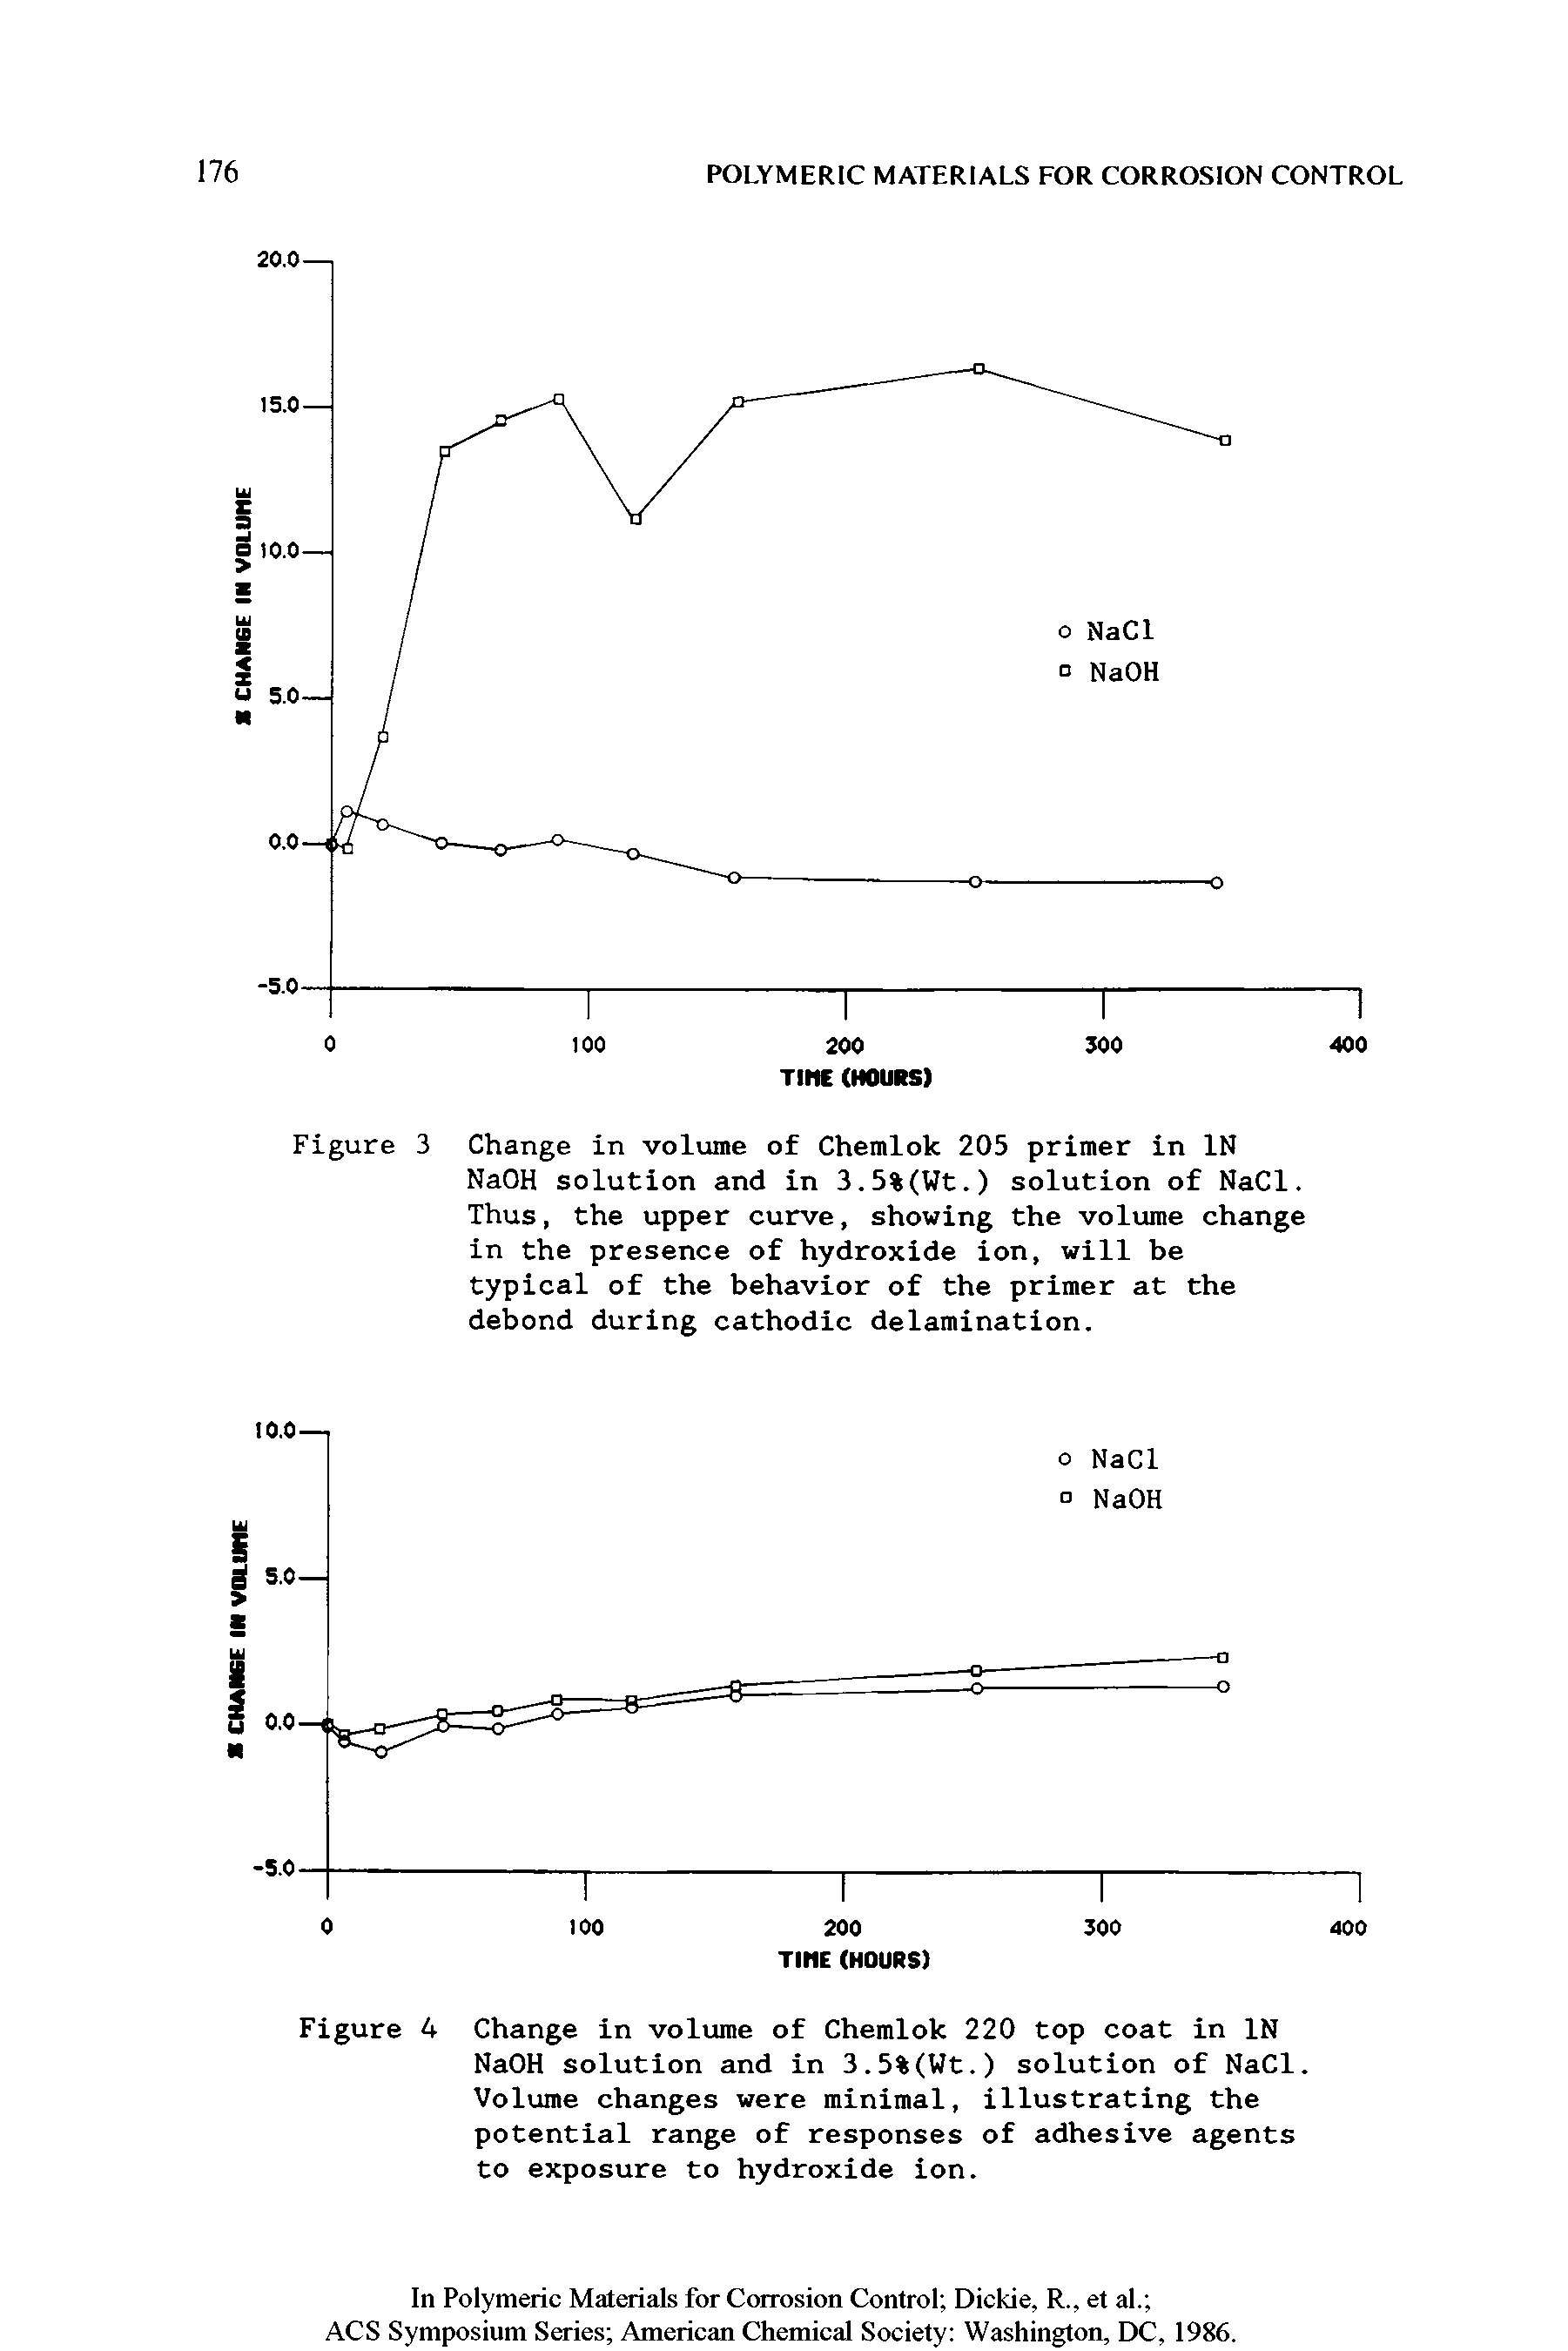 Figure 4 Change in volume of Chemlok 220 top coat in IN NaOH solution and in 3.5%(Wt.) solution of NaCl. Volume changes were minimal, illustrating the potential range of responses of adhesive agents to exposure to hydroxide ion.